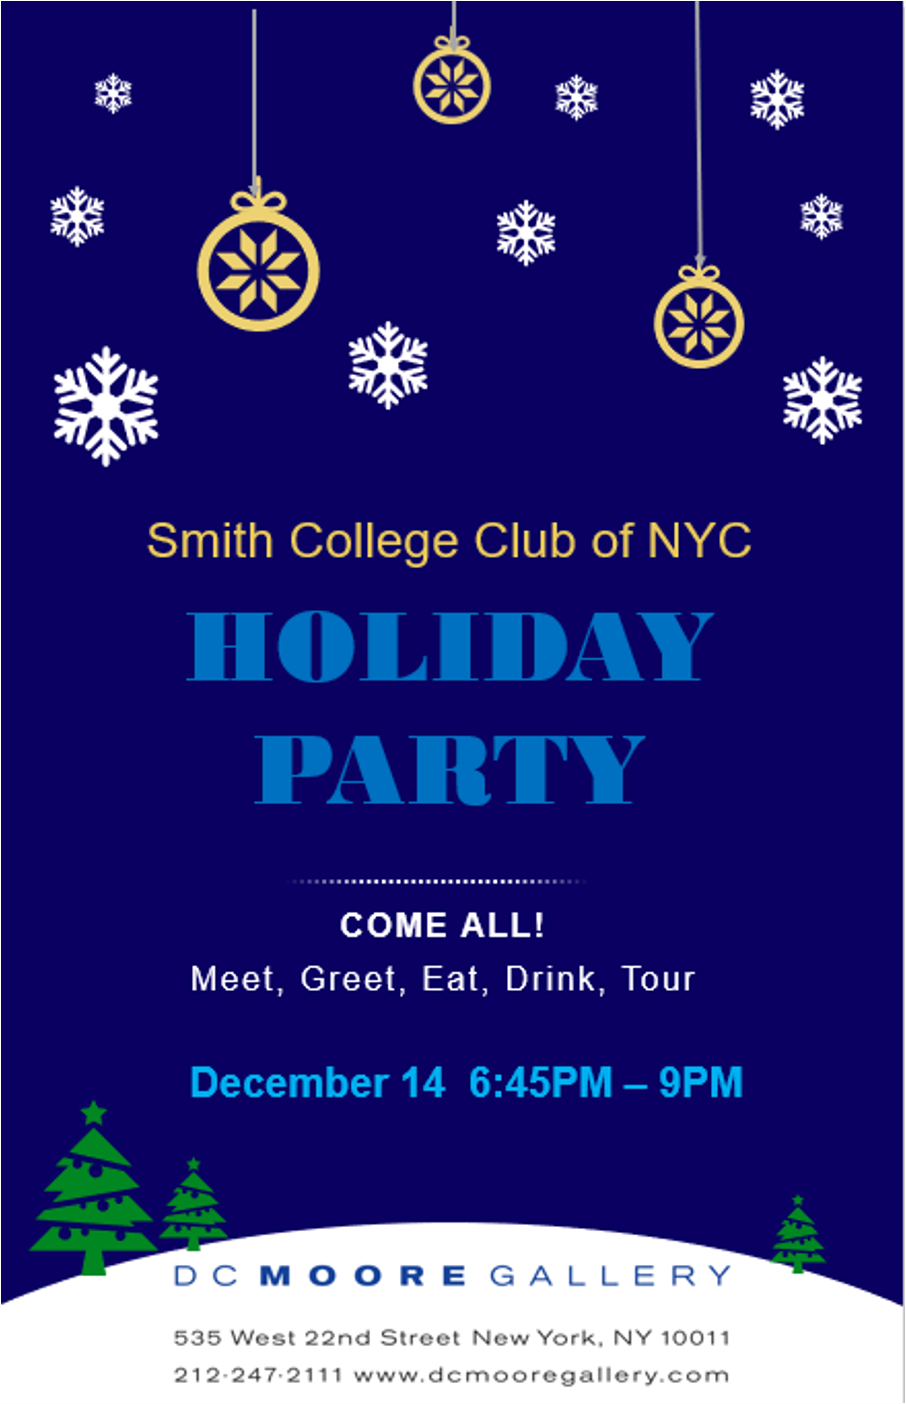 promo-for-holiday-party.jpg